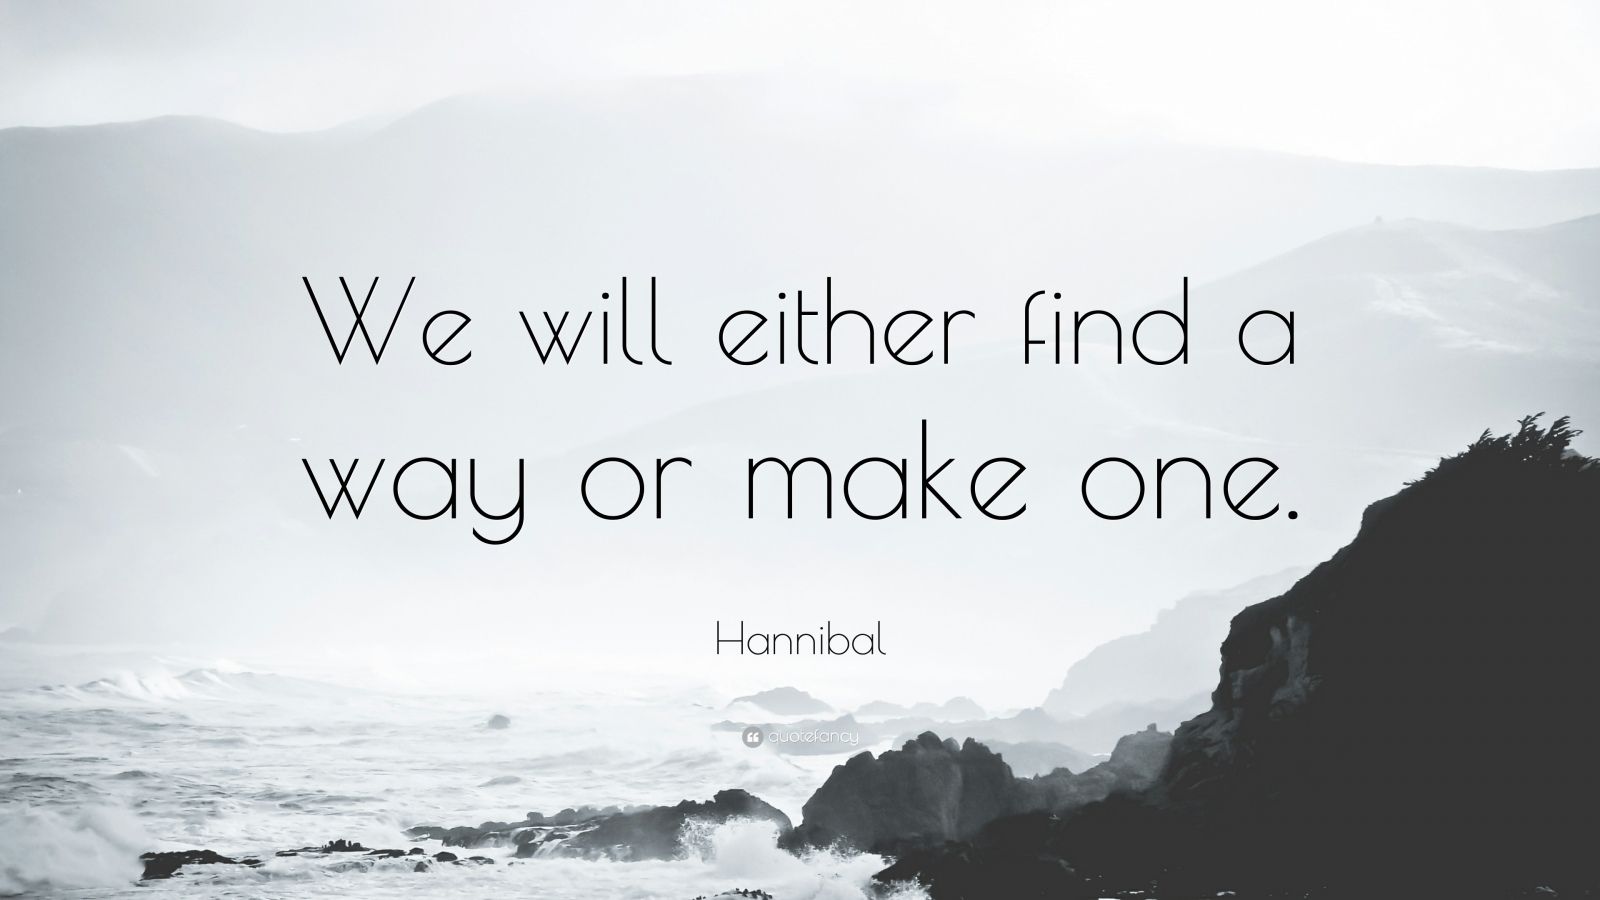 Hannibal Quote: “We will either find a way or make one.” (23 wallpapers